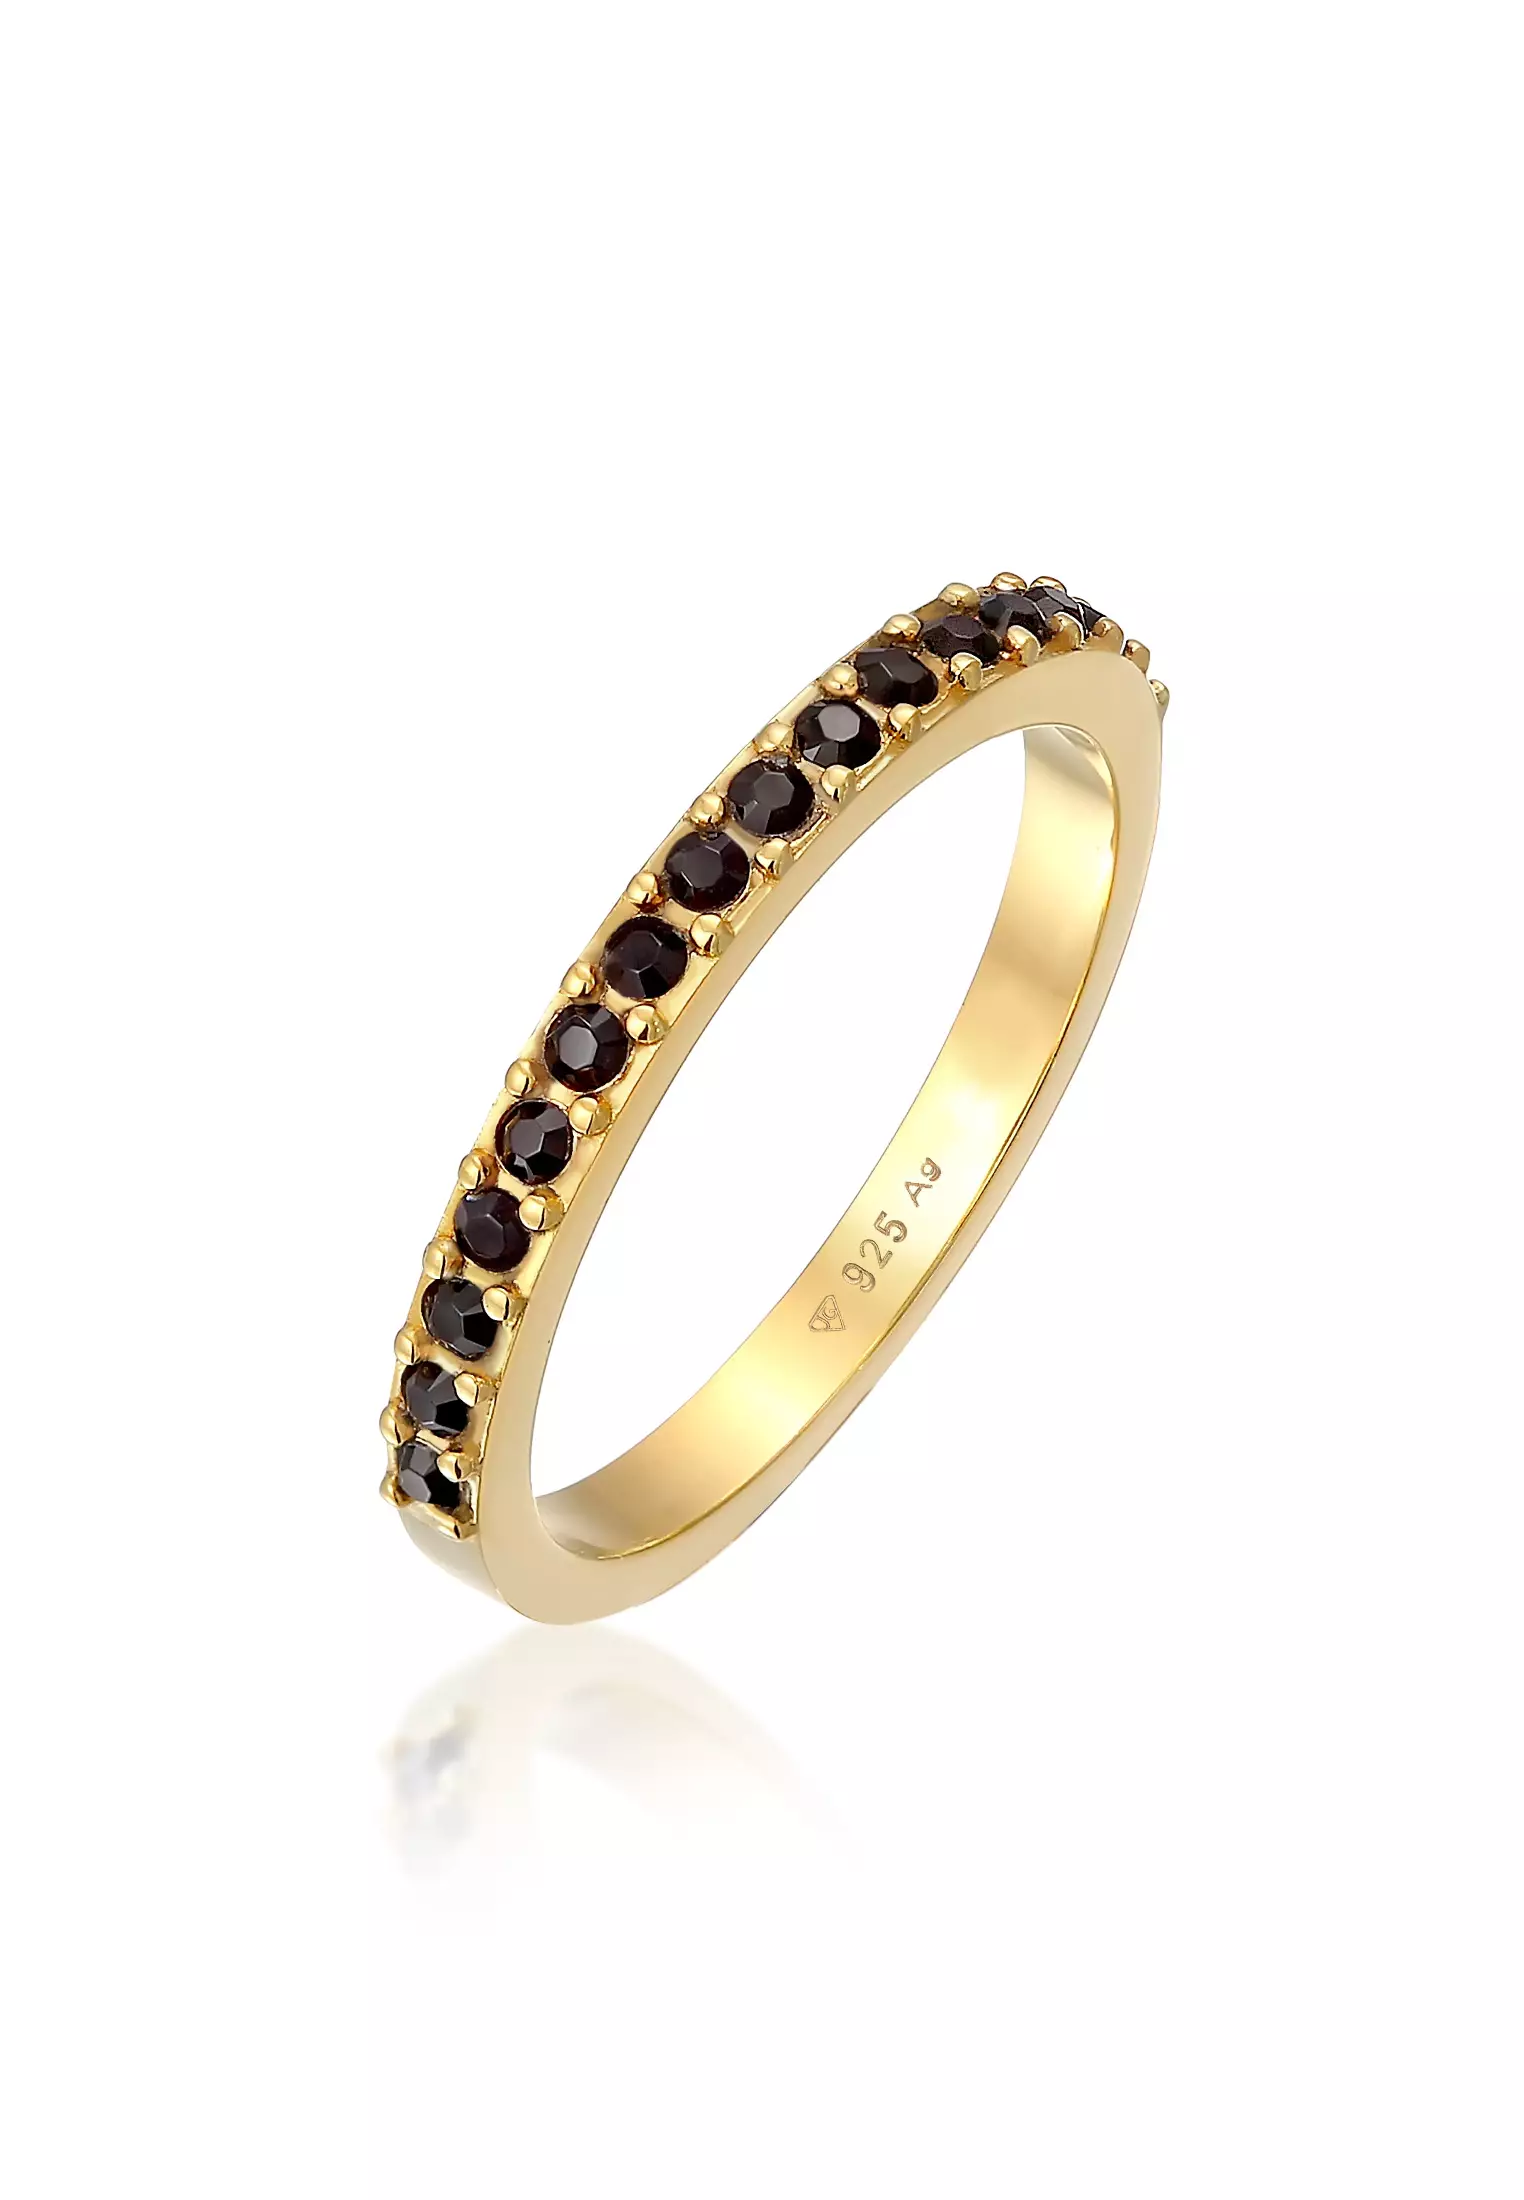 Buy ELLI Malaysia | Ring Online GERMANY Gold Crystals Plated Memoire Band ZALORA